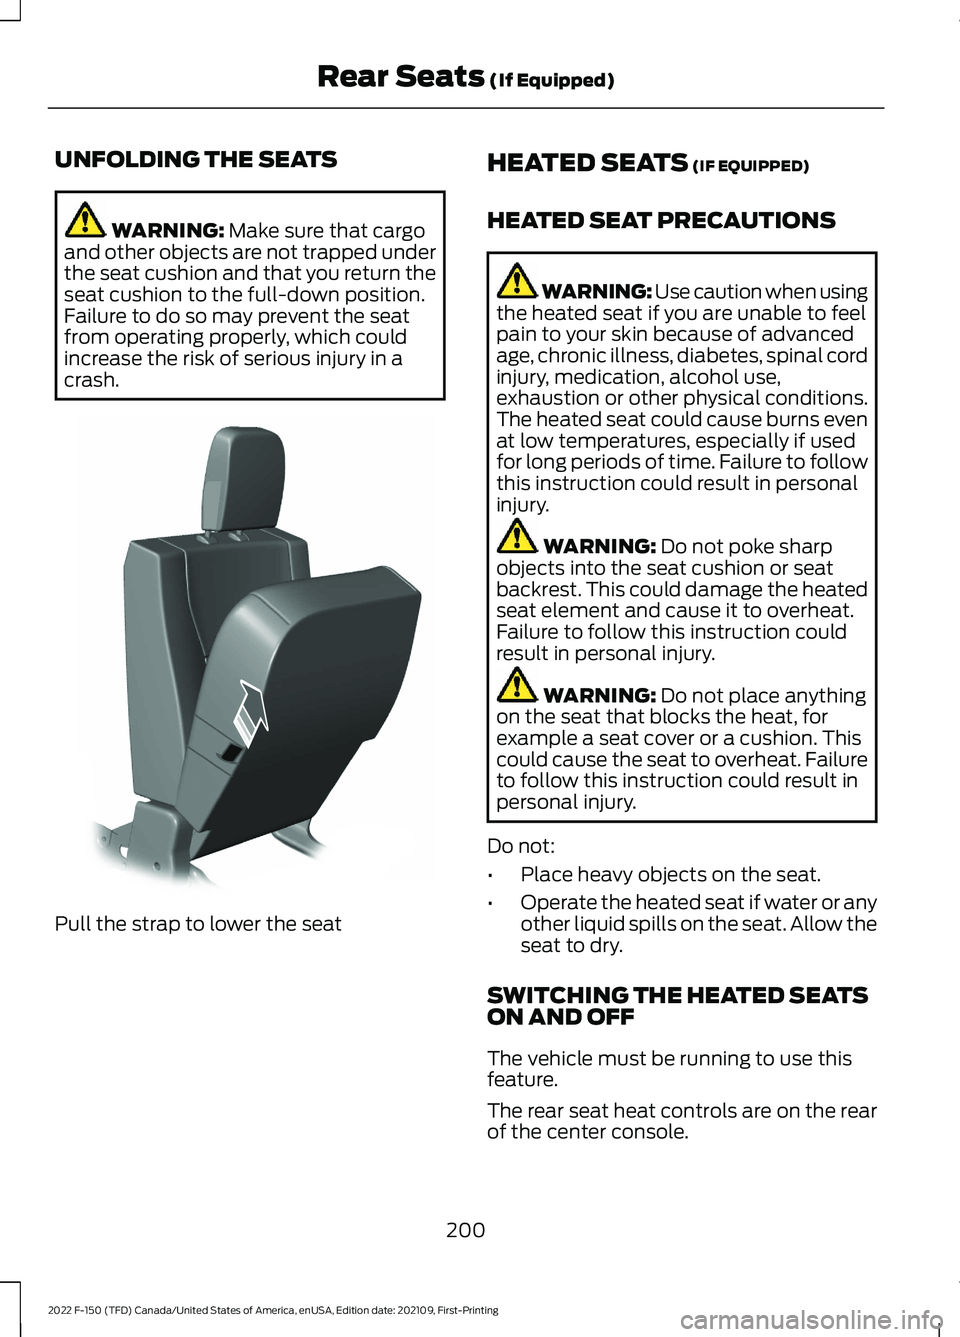 FORD F-150 2022  Owners Manual UNFOLDING THE SEATS
WARNING: Make sure that cargo
and other objects are not trapped under
the seat cushion and that you return the
seat cushion to the full-down position.
Failure to do so may prevent 